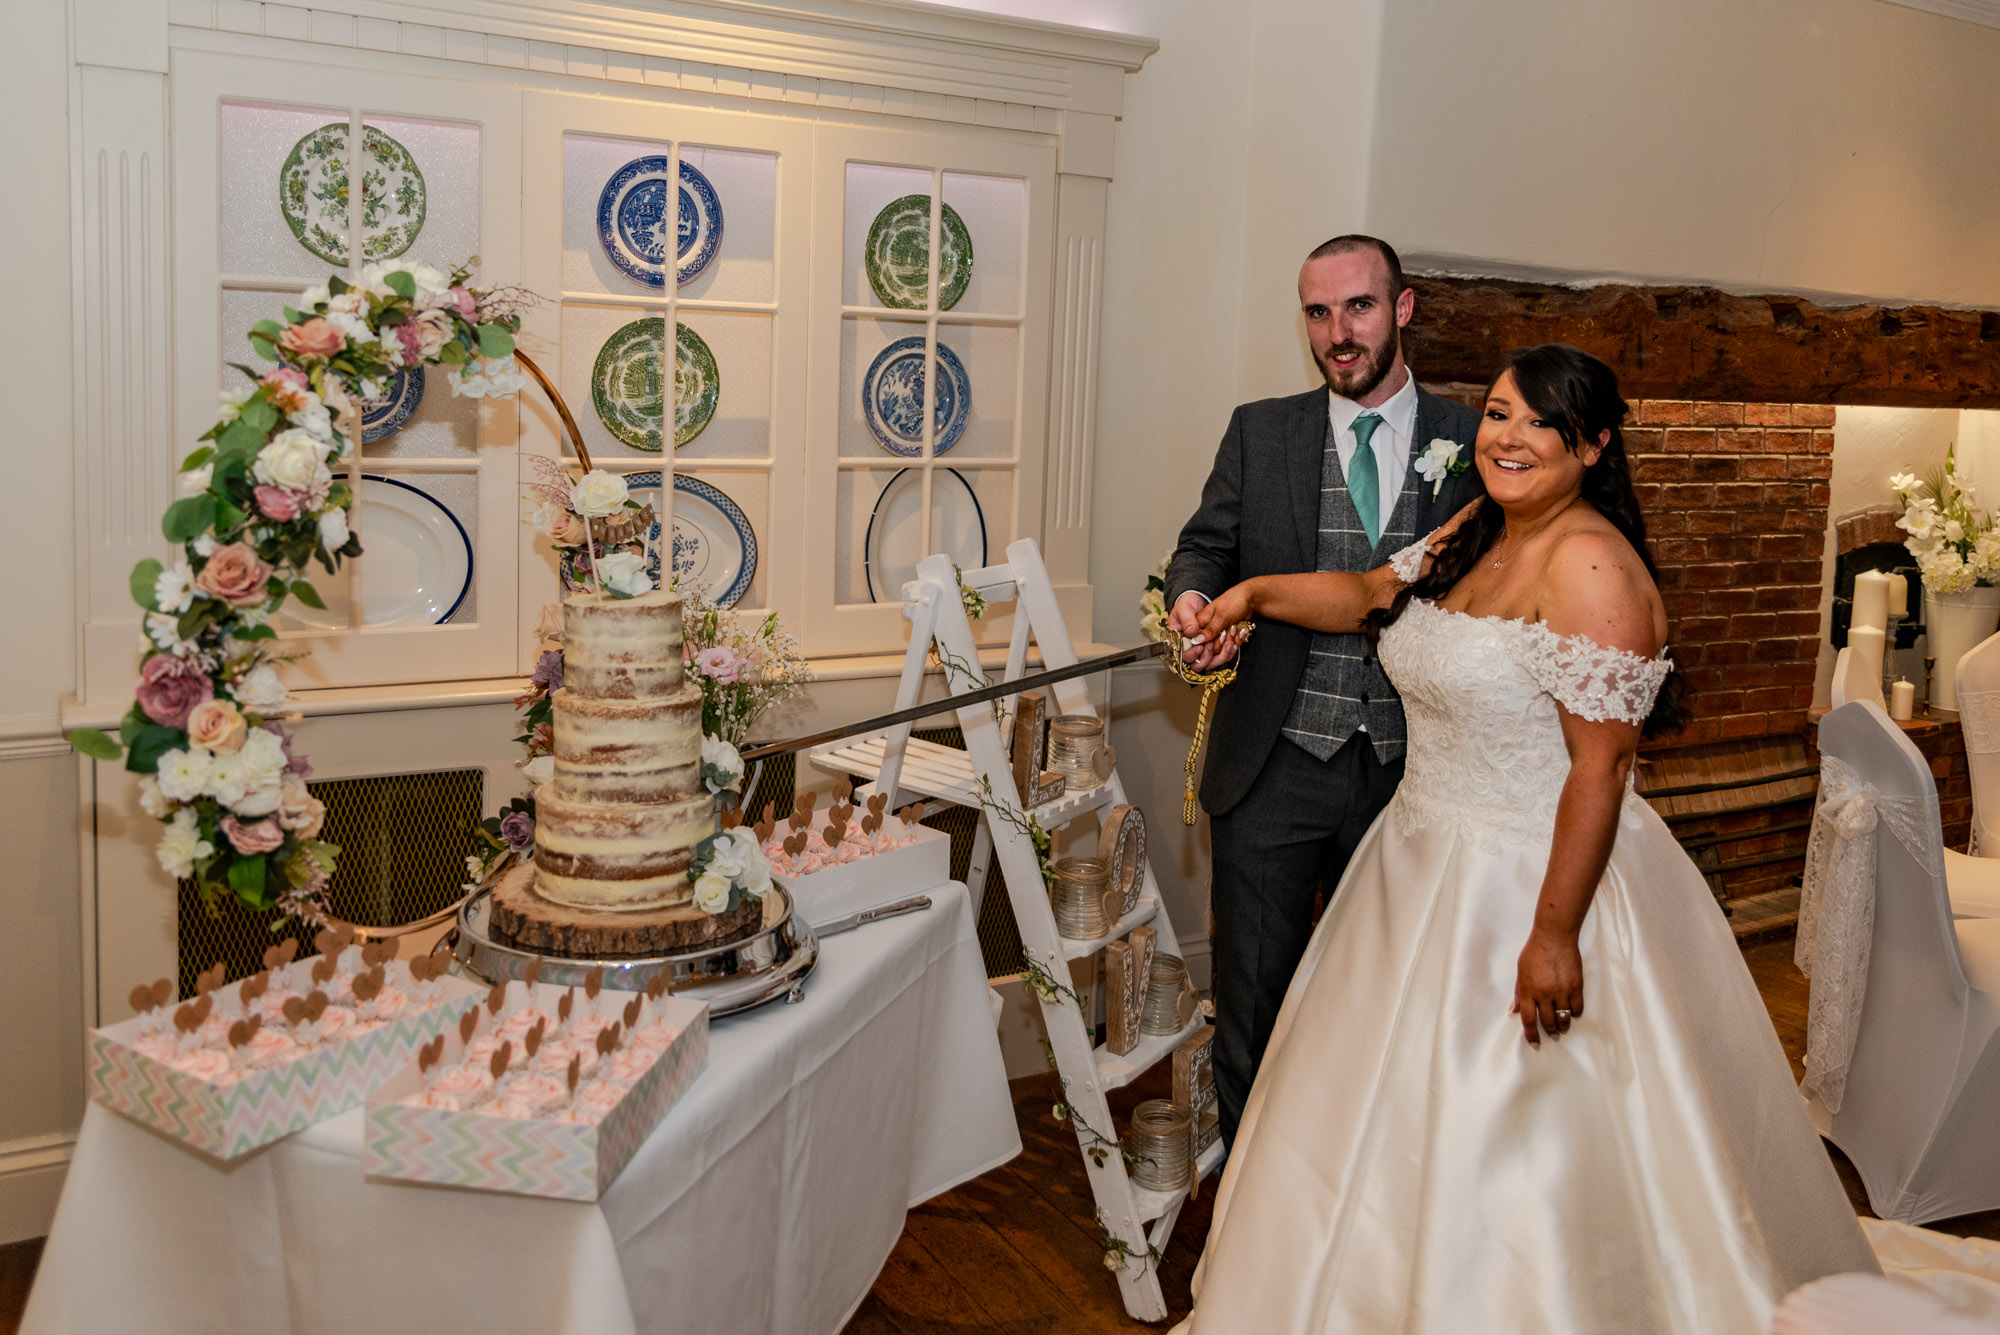 Bride and Groom cake cutting with a military sword at The Barns Hotel Cannock